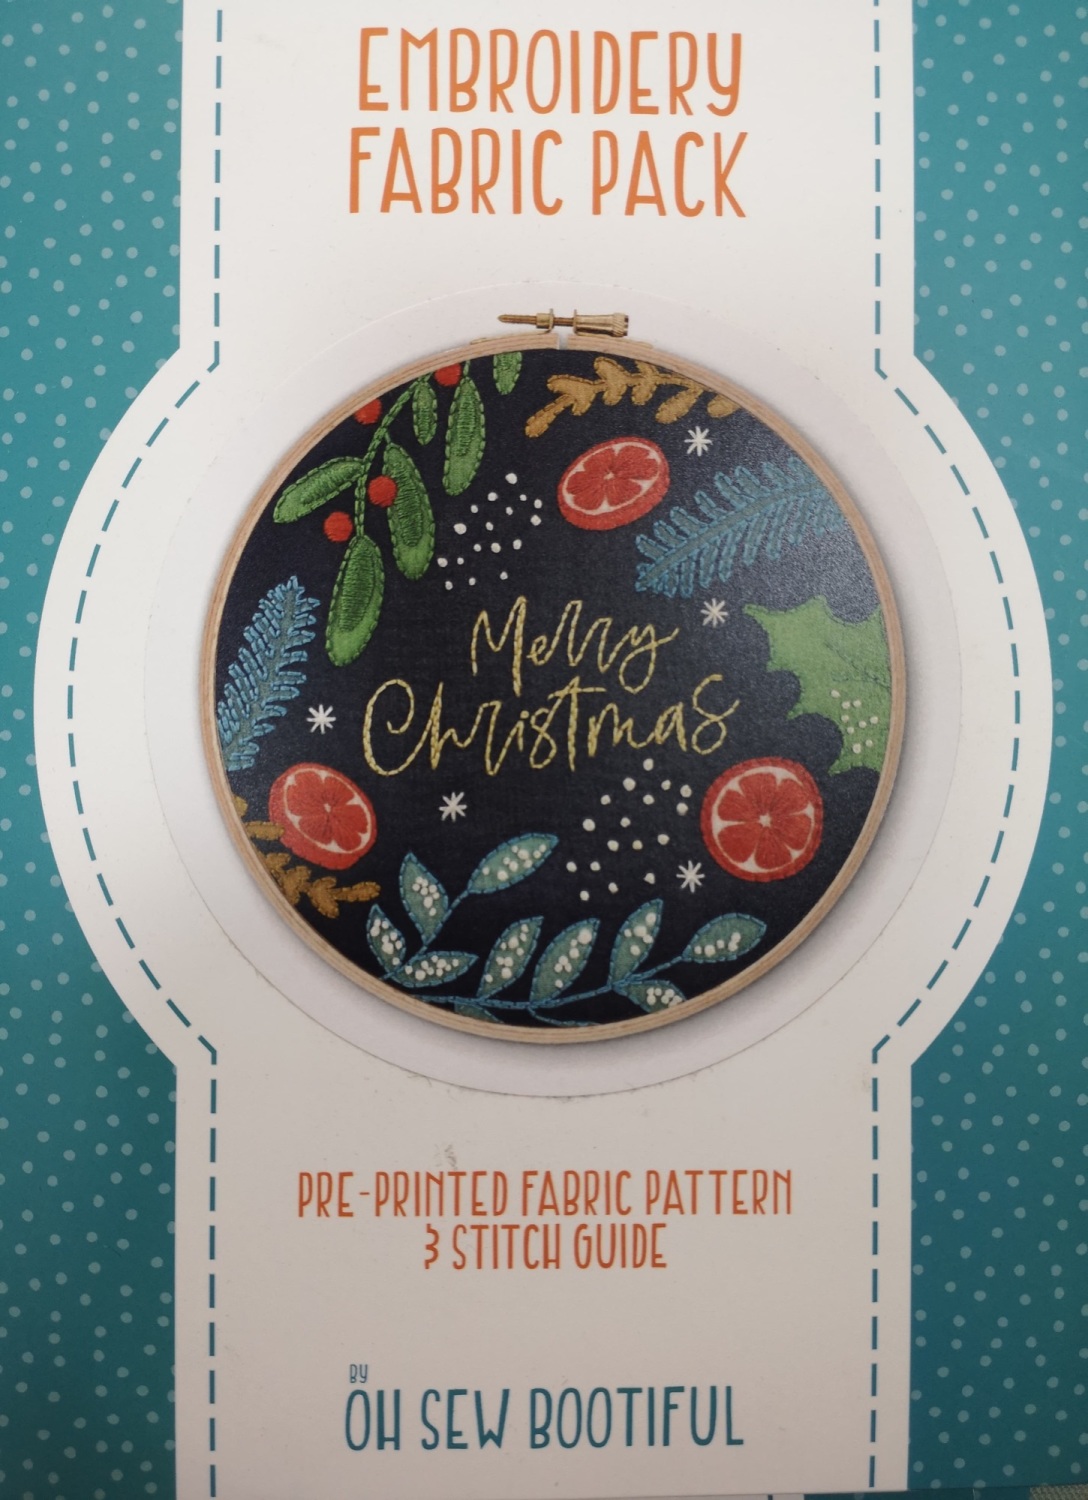 embroidery fabric pack by Oh Sew Bootiful - Merry Christmas